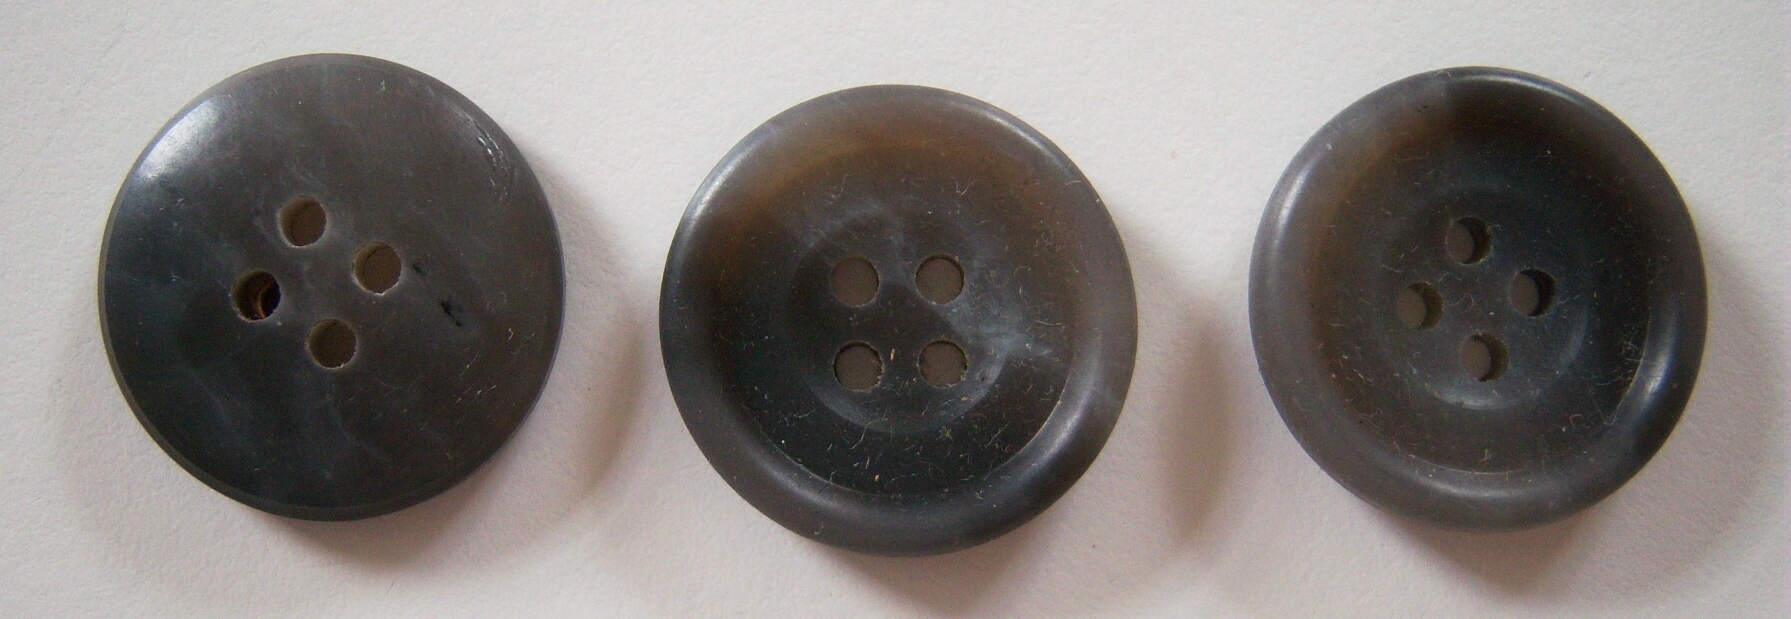 Grey/Charcoal 1" 4 Hole Button